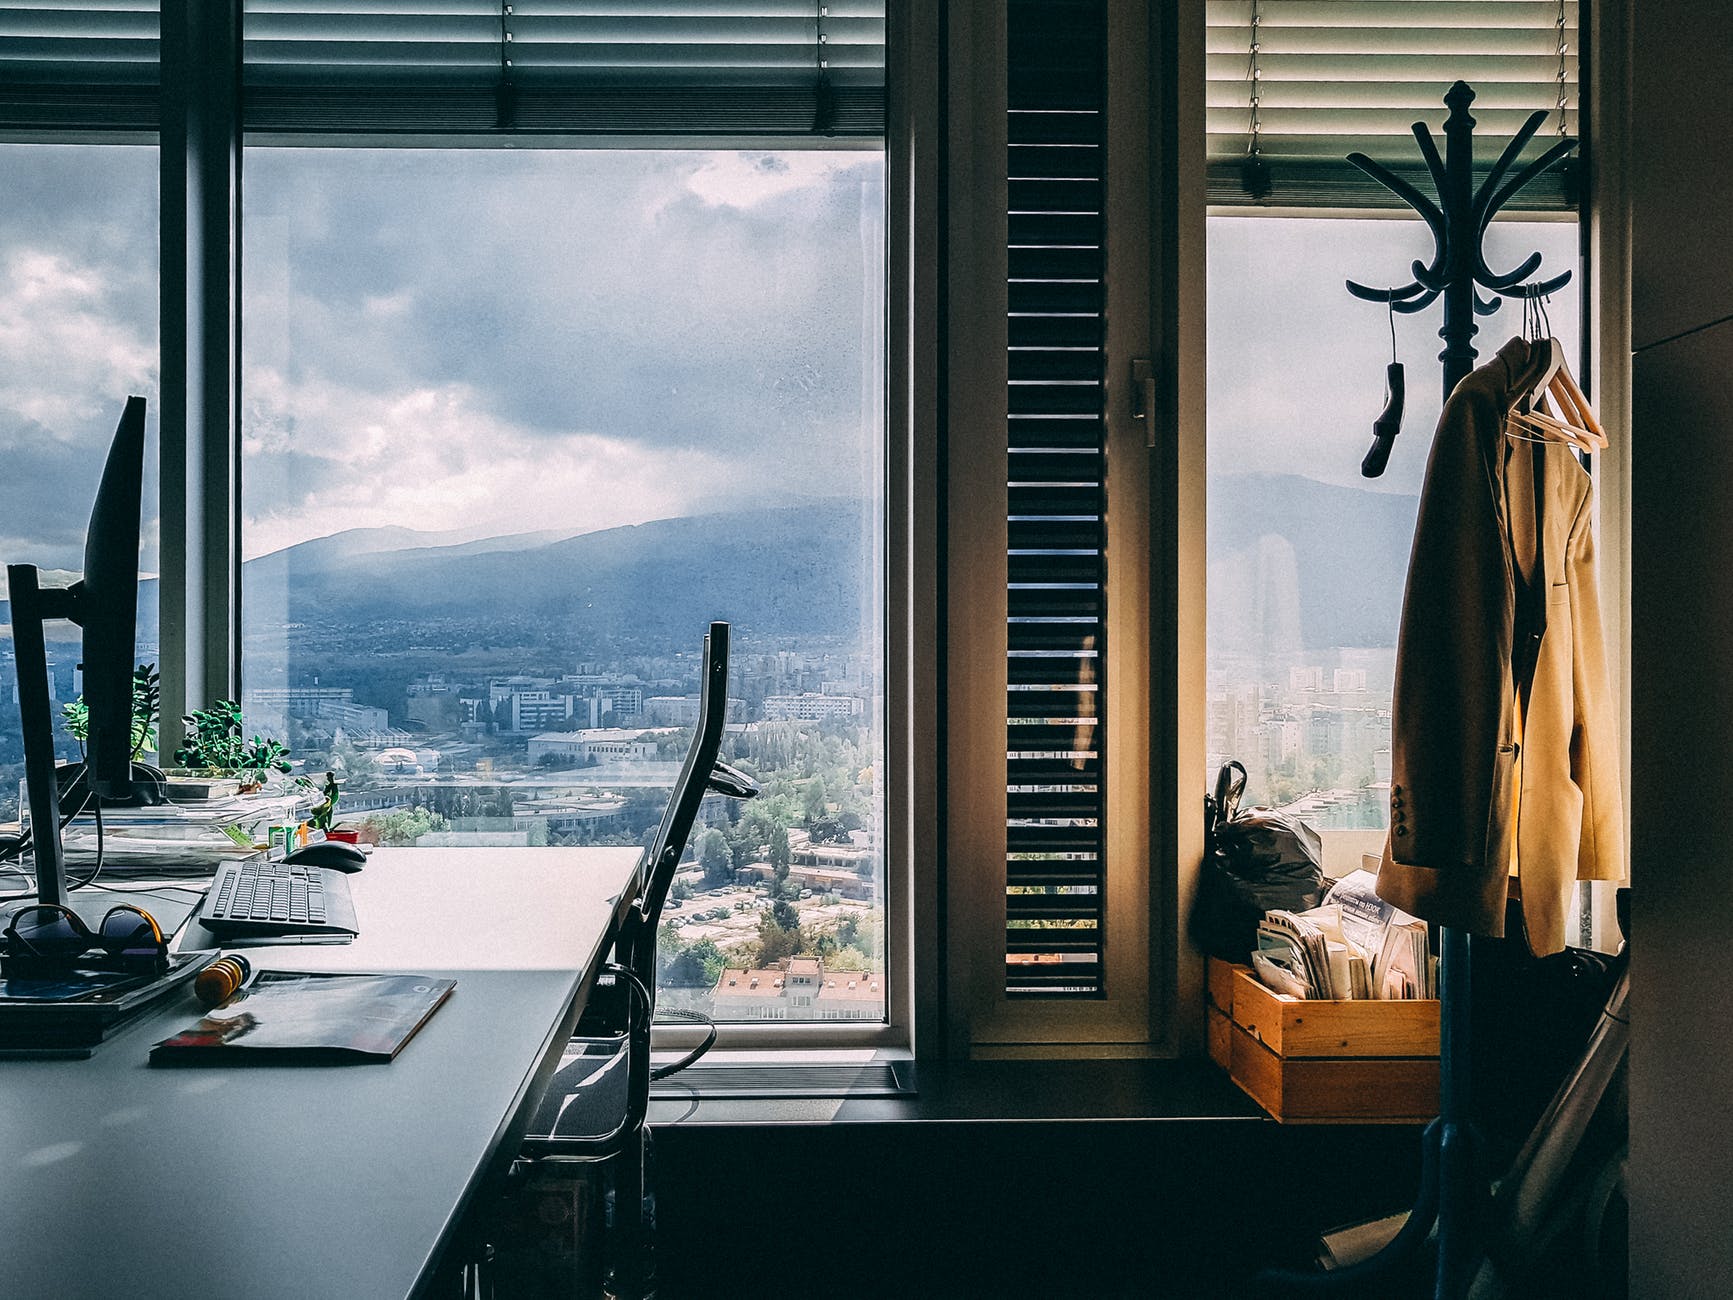 A desk near a window overlooking the city and mountains